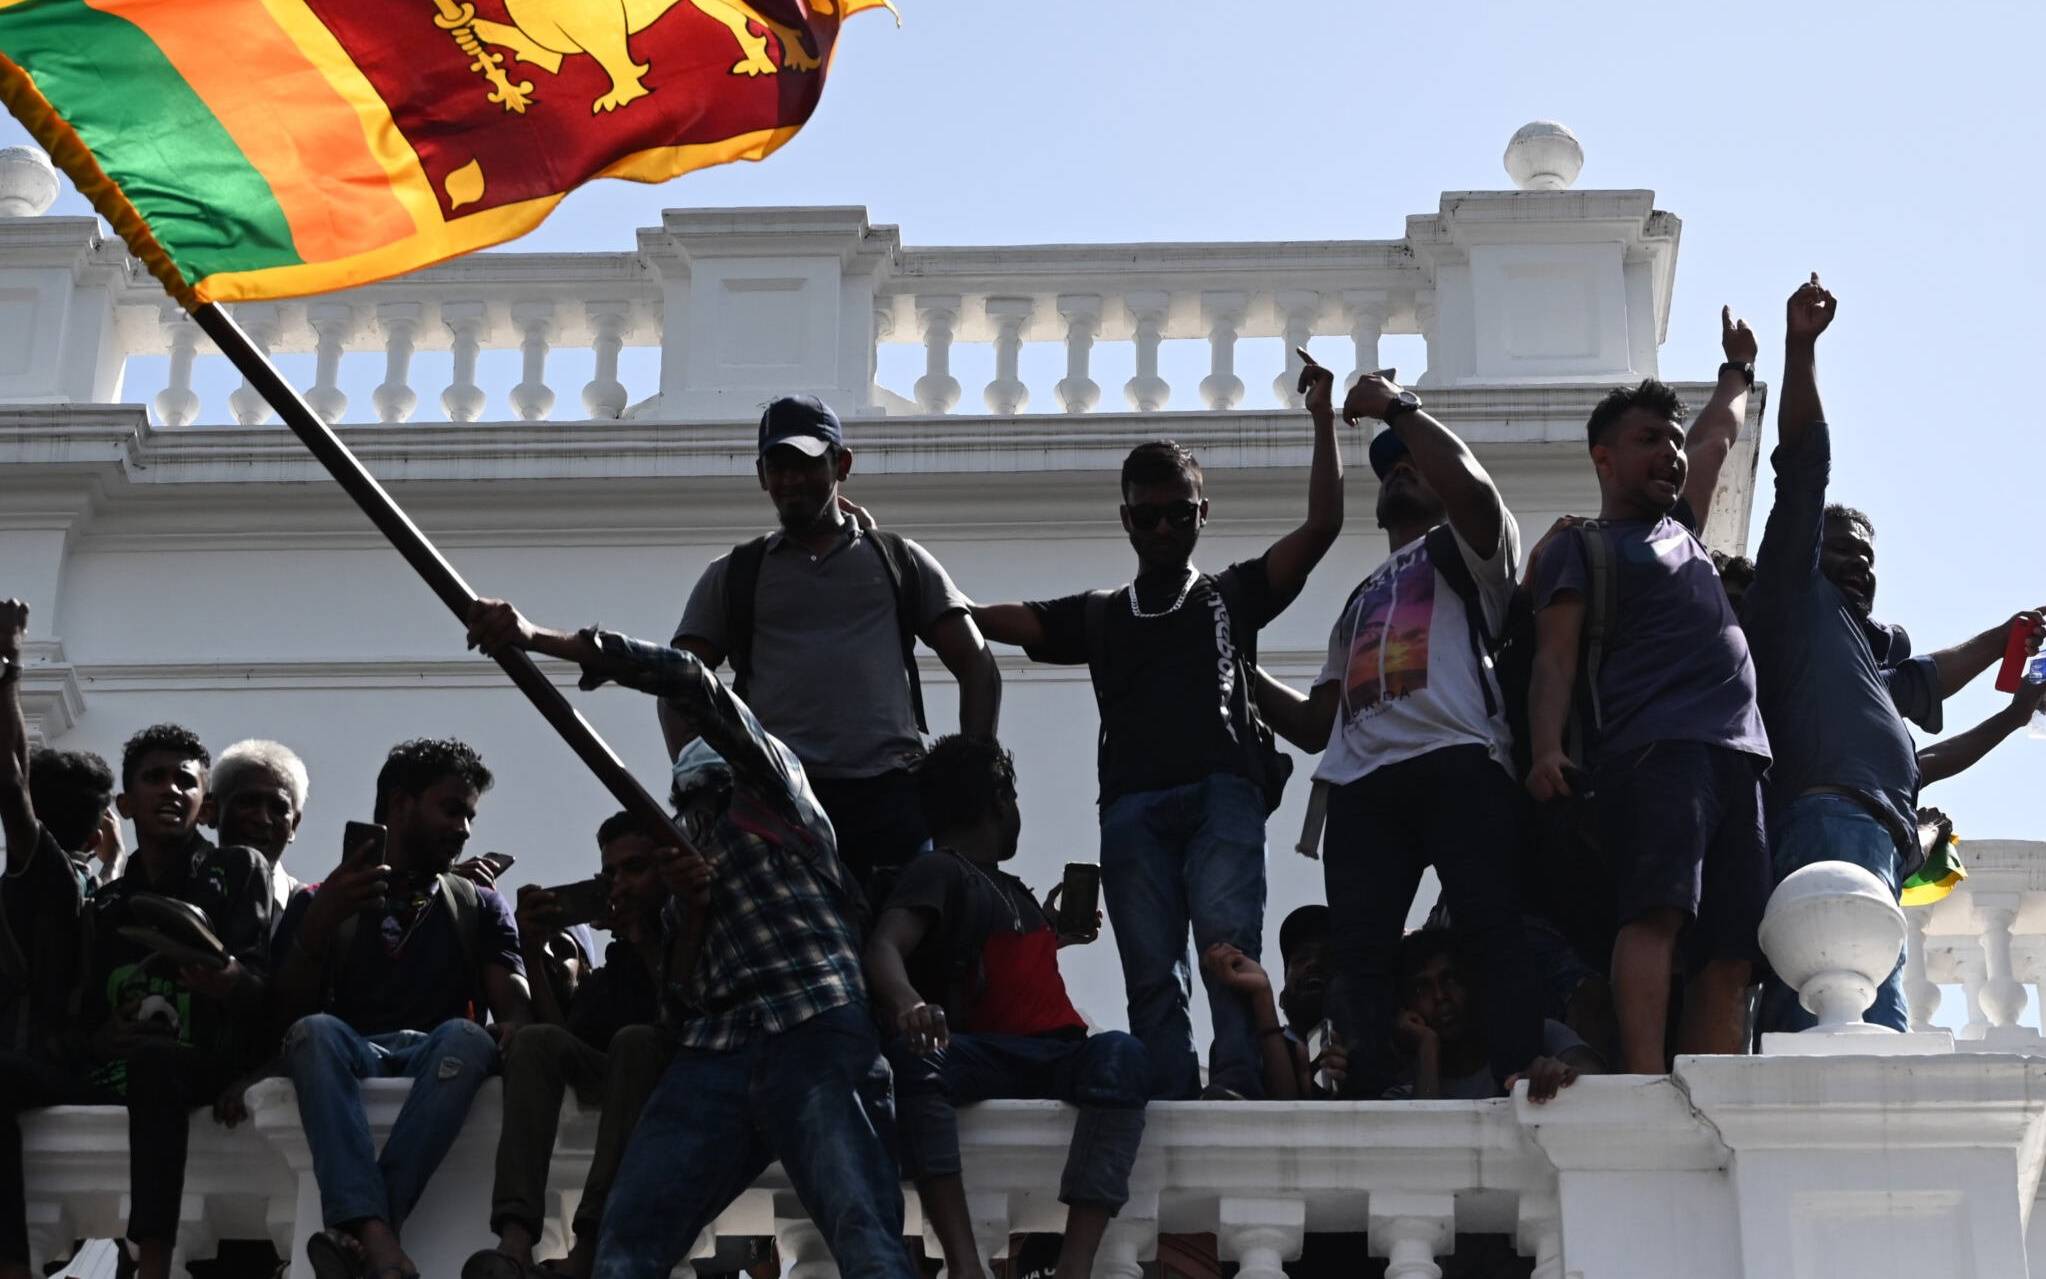 Demonstrators shout slogans and wave Sri Lankan flags from a balcony during an anti-government protest inside the office building of Sri Lanka's prime minister in Colombo on July 13, 2022. - Thousands of anti-government protesters stormed into Sri Lanka Prime Minister Ranil Wickremesinghe's office on July 13, hours after he was named as acting president, witnesses said. (Photo by Arun SANKAR / AFP)